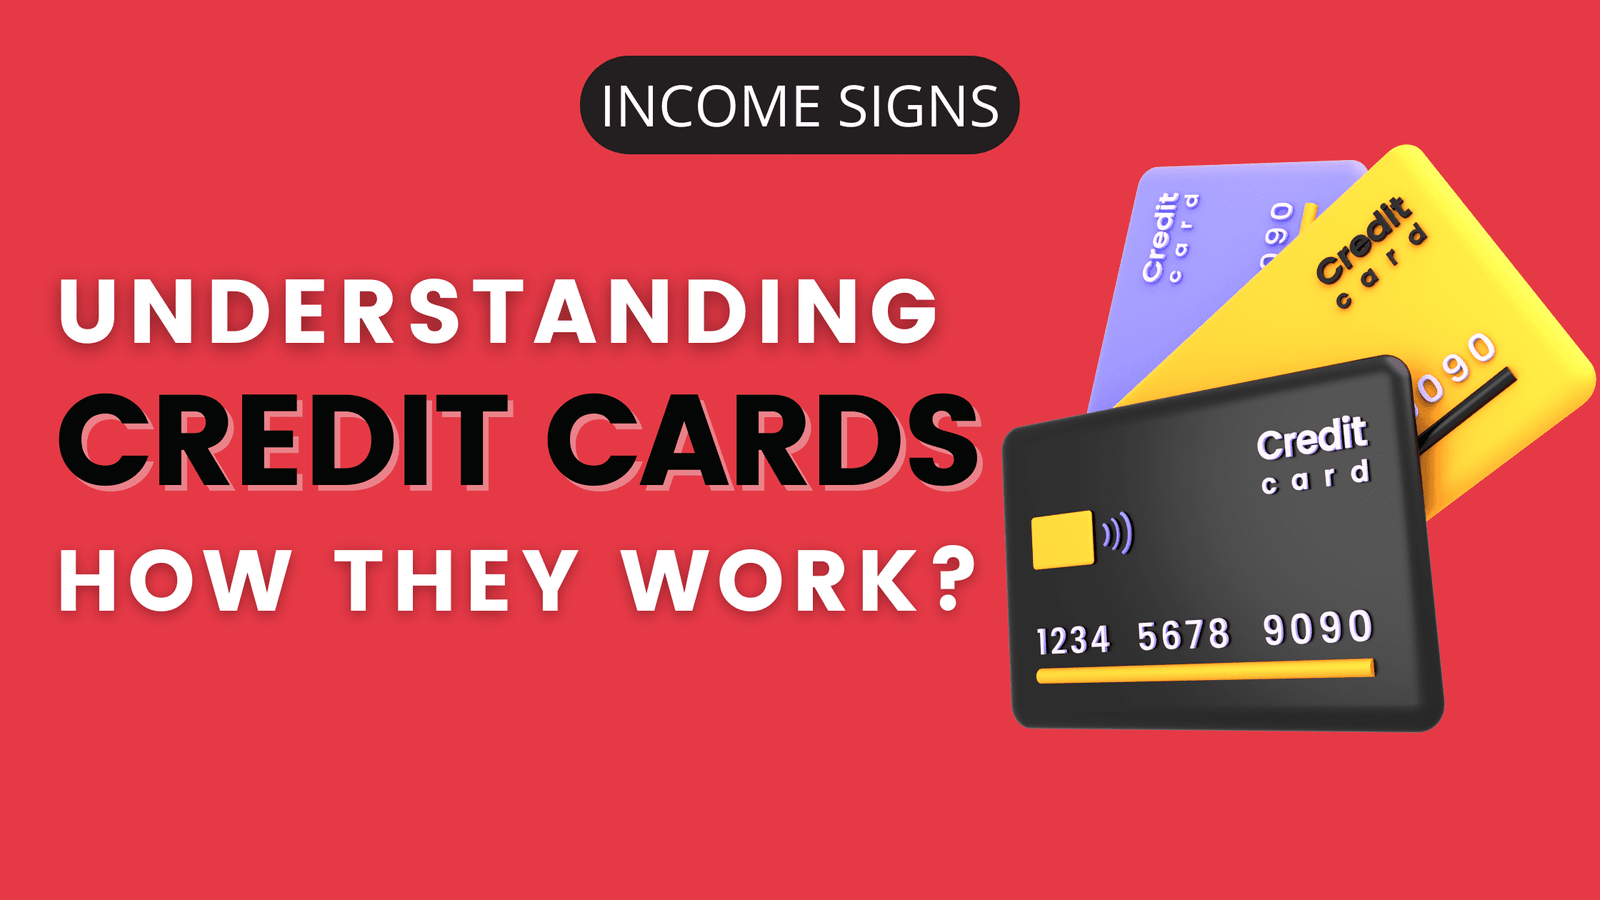 Understanding Credit Cards What Are They and How Do They Work - Income Signs